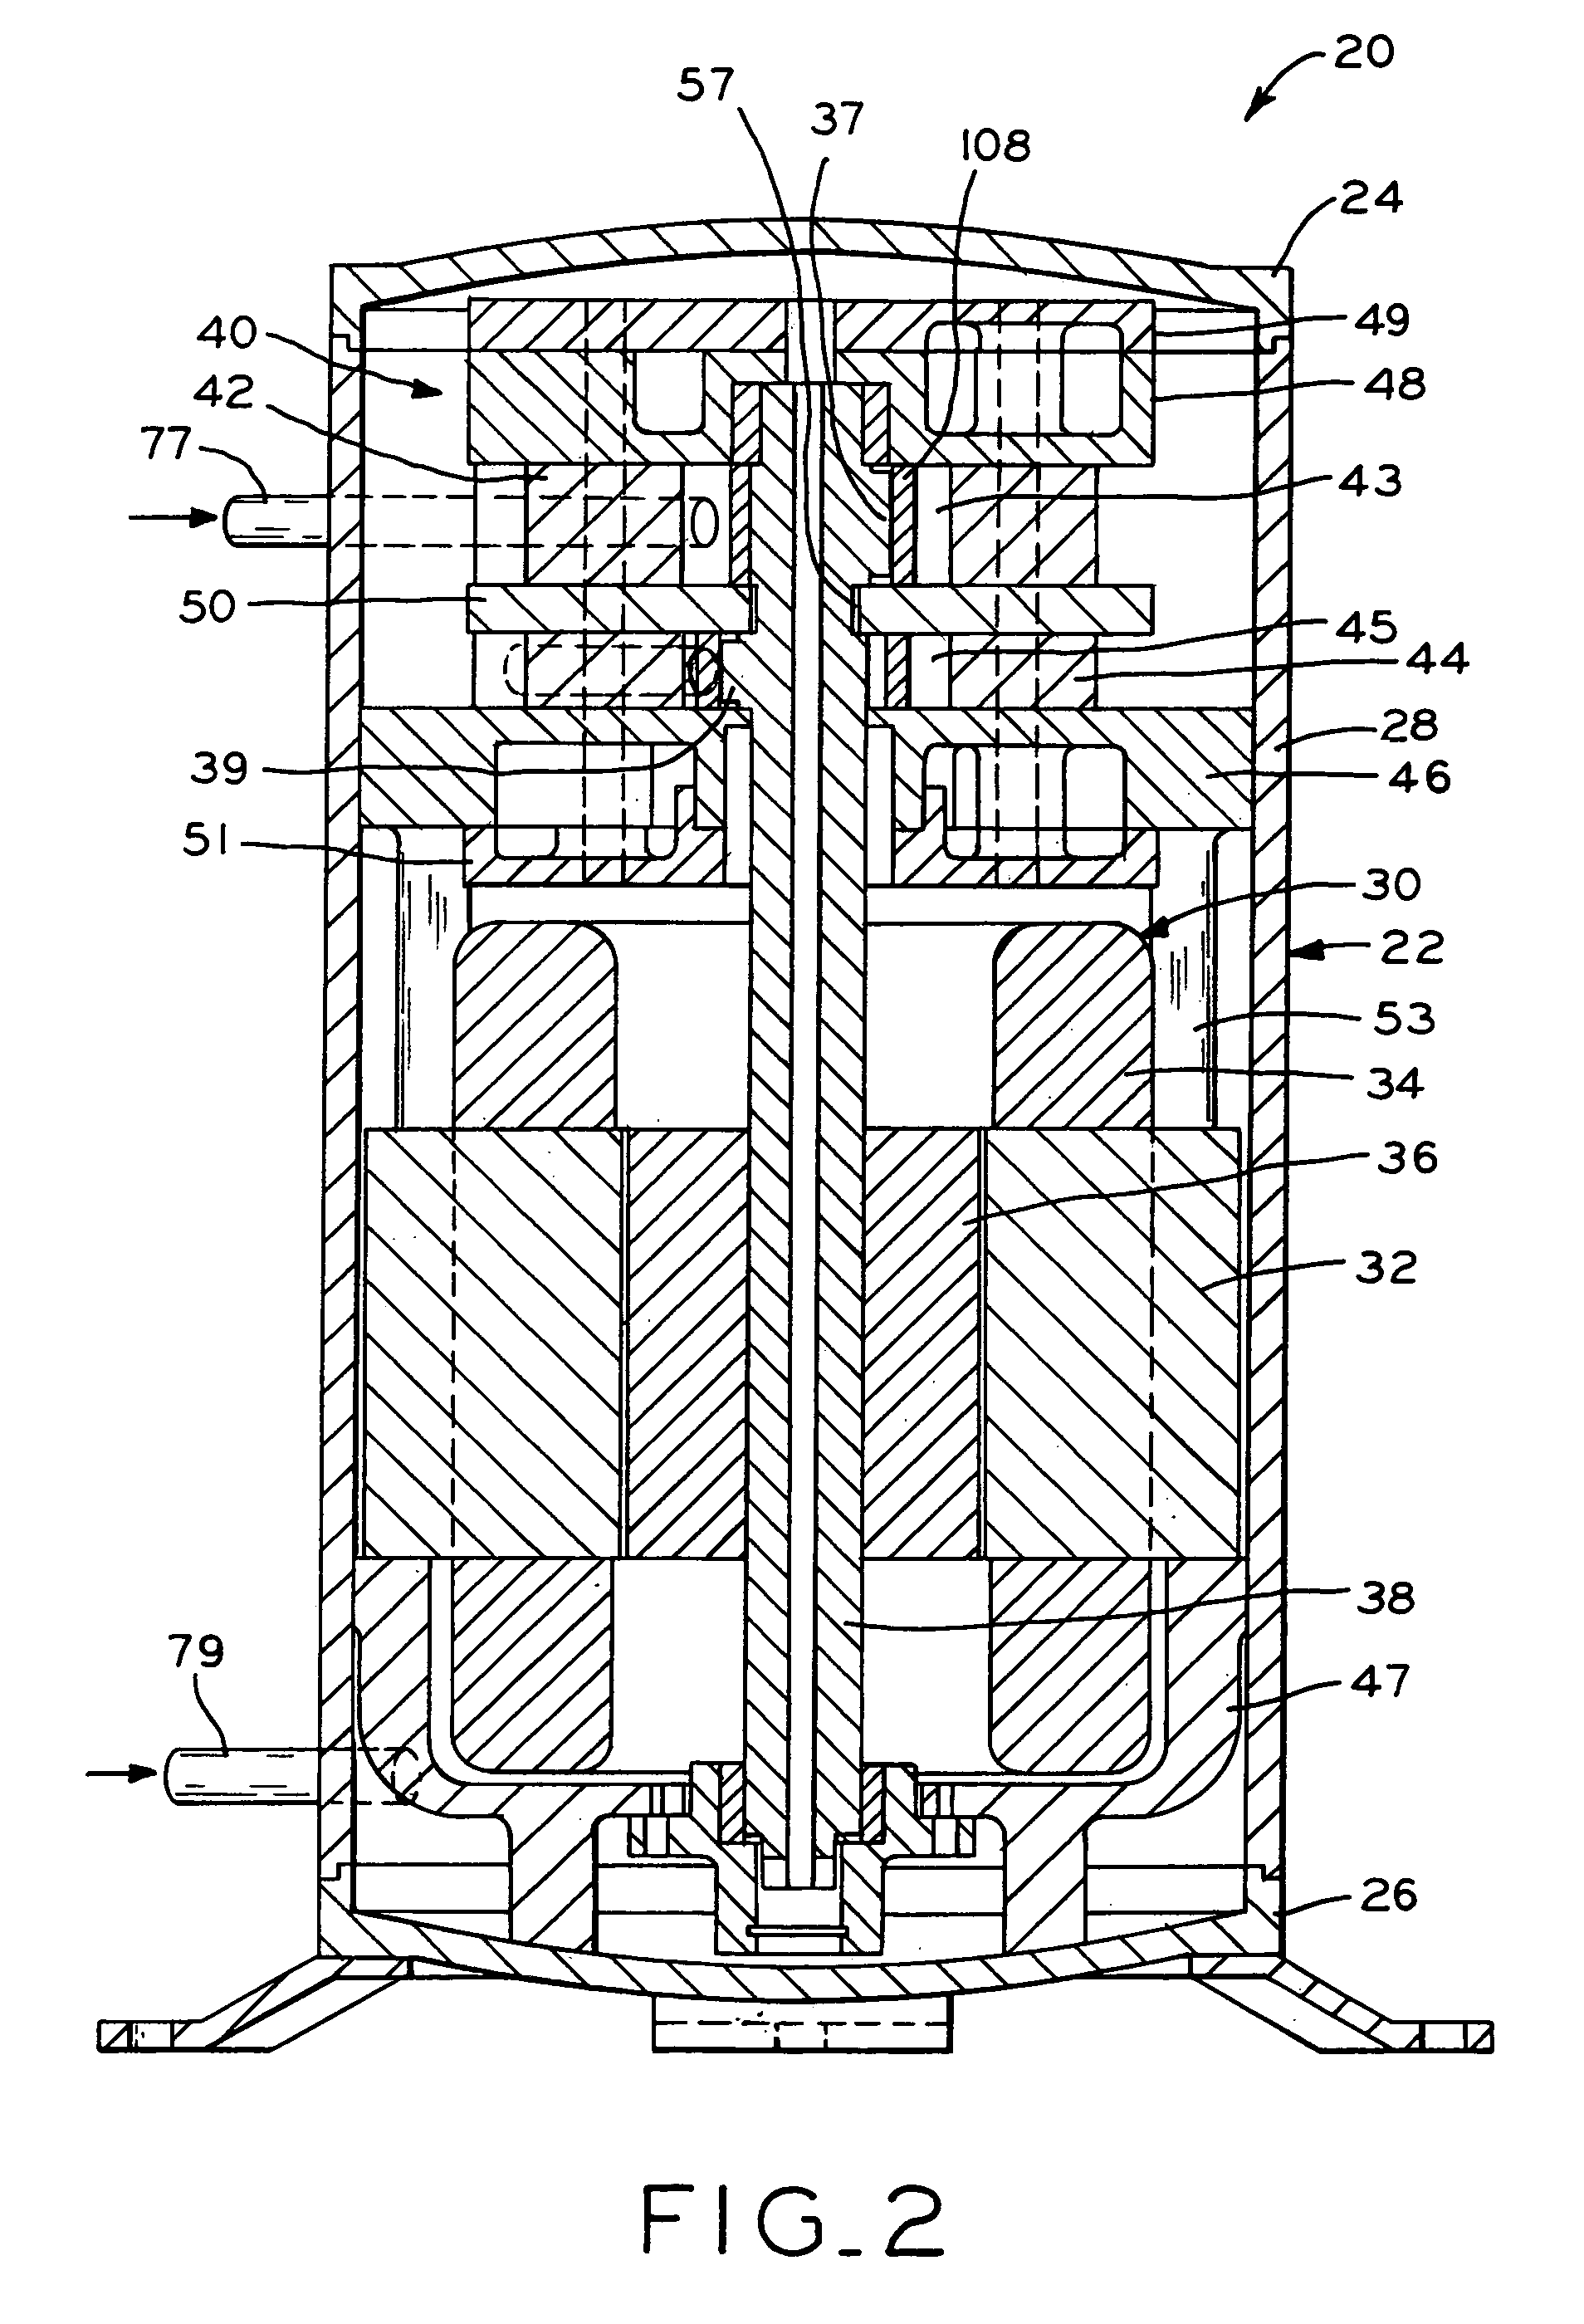 Terminal block assembly for a hermetic compressor